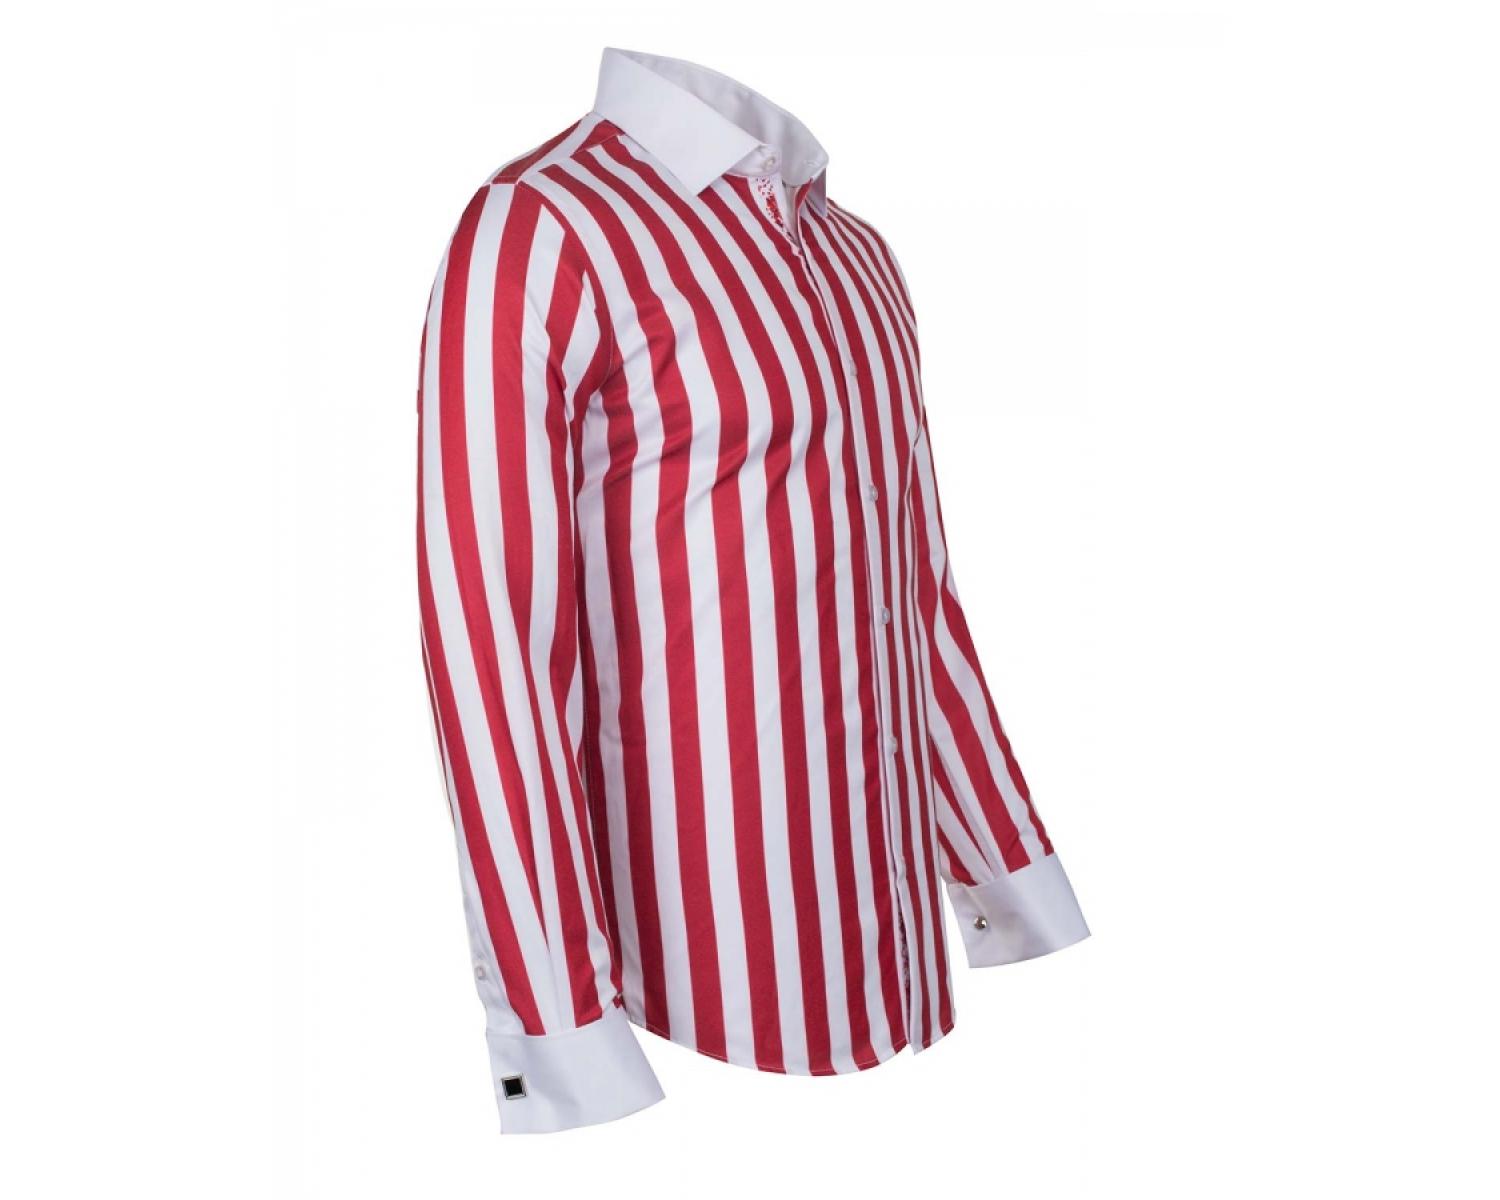 SL 6521 Men's white & red striped double cuff shirt - Quality Designed ...